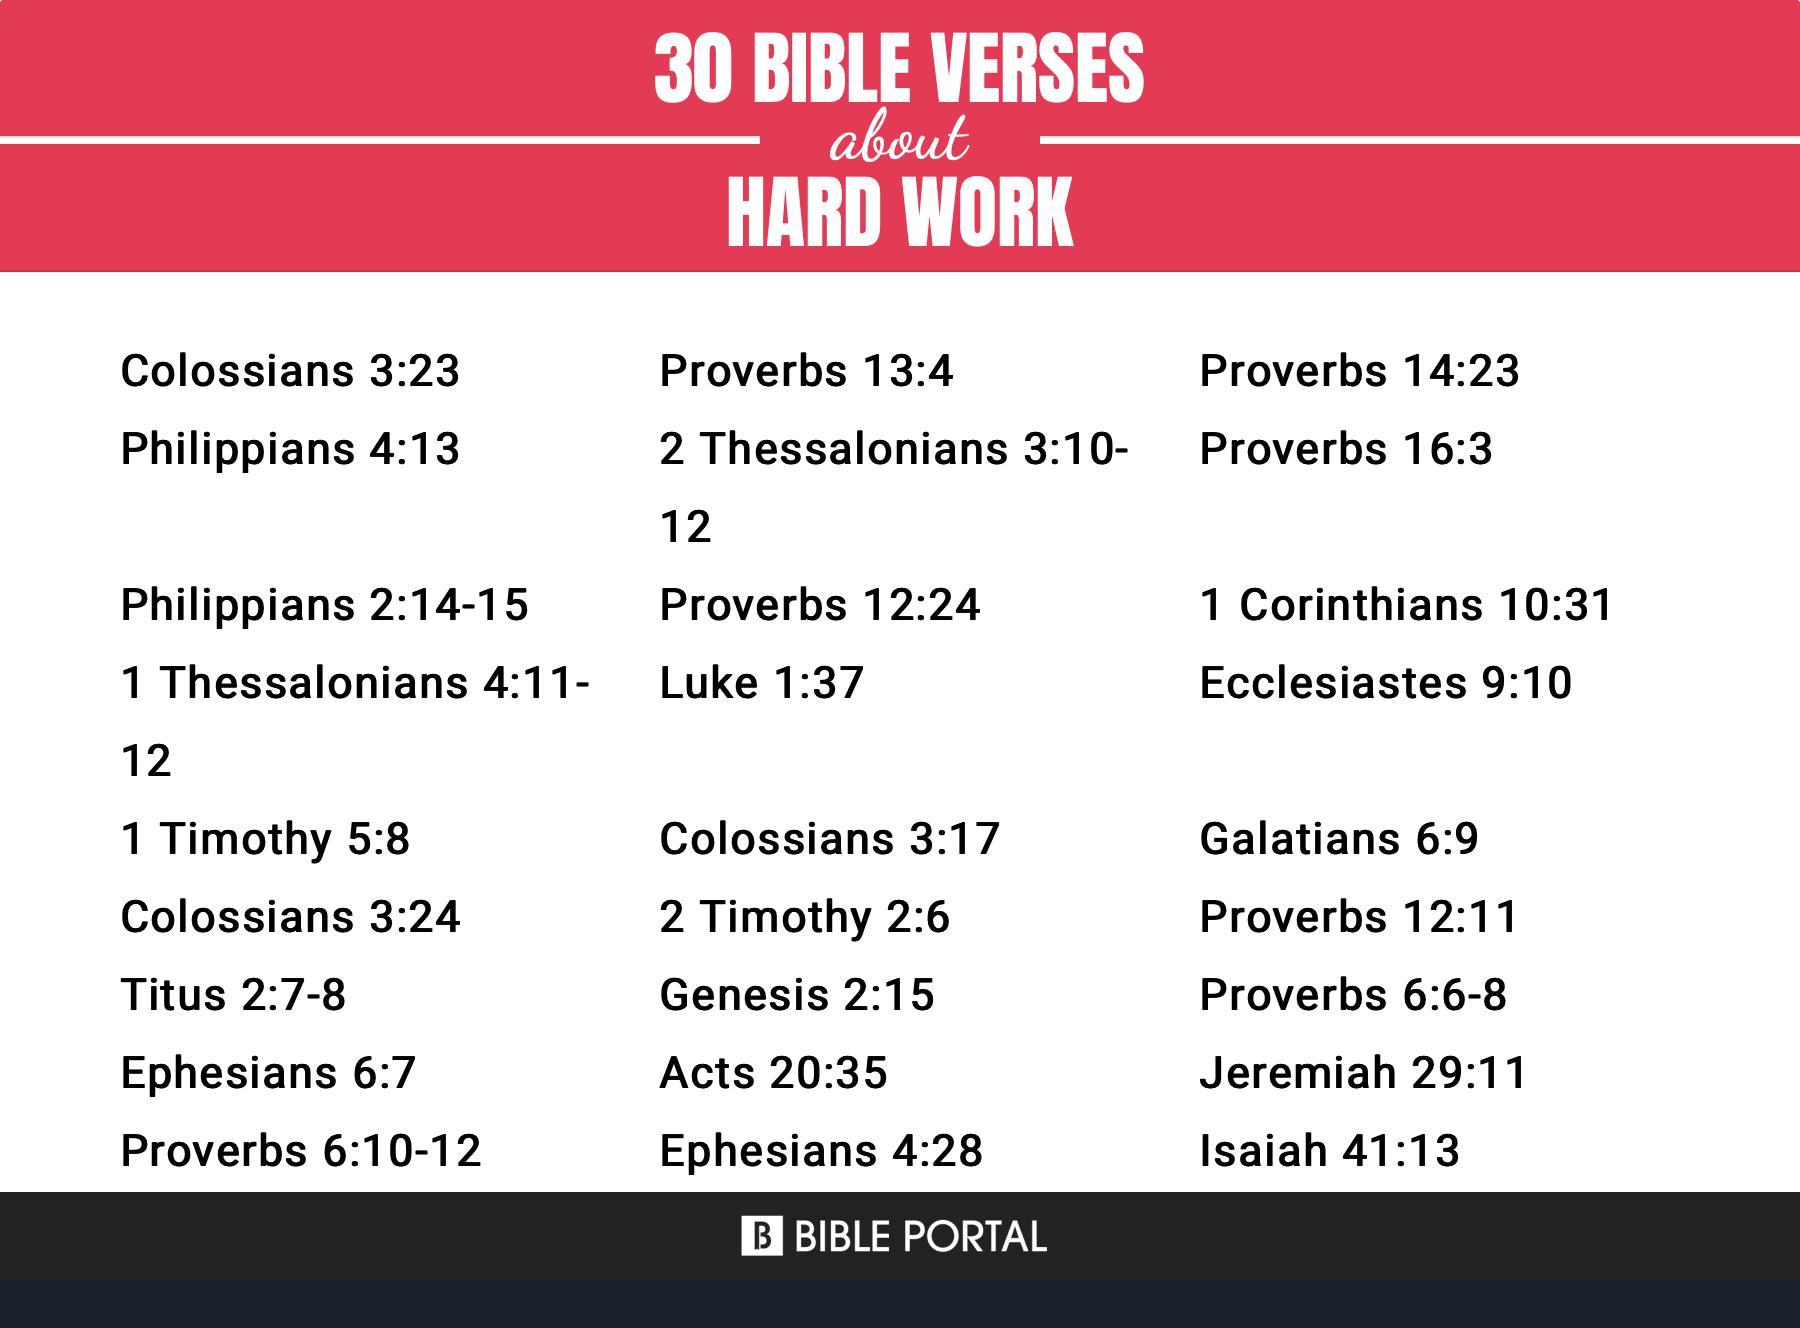 What Does the Bible Say about Hard Work?